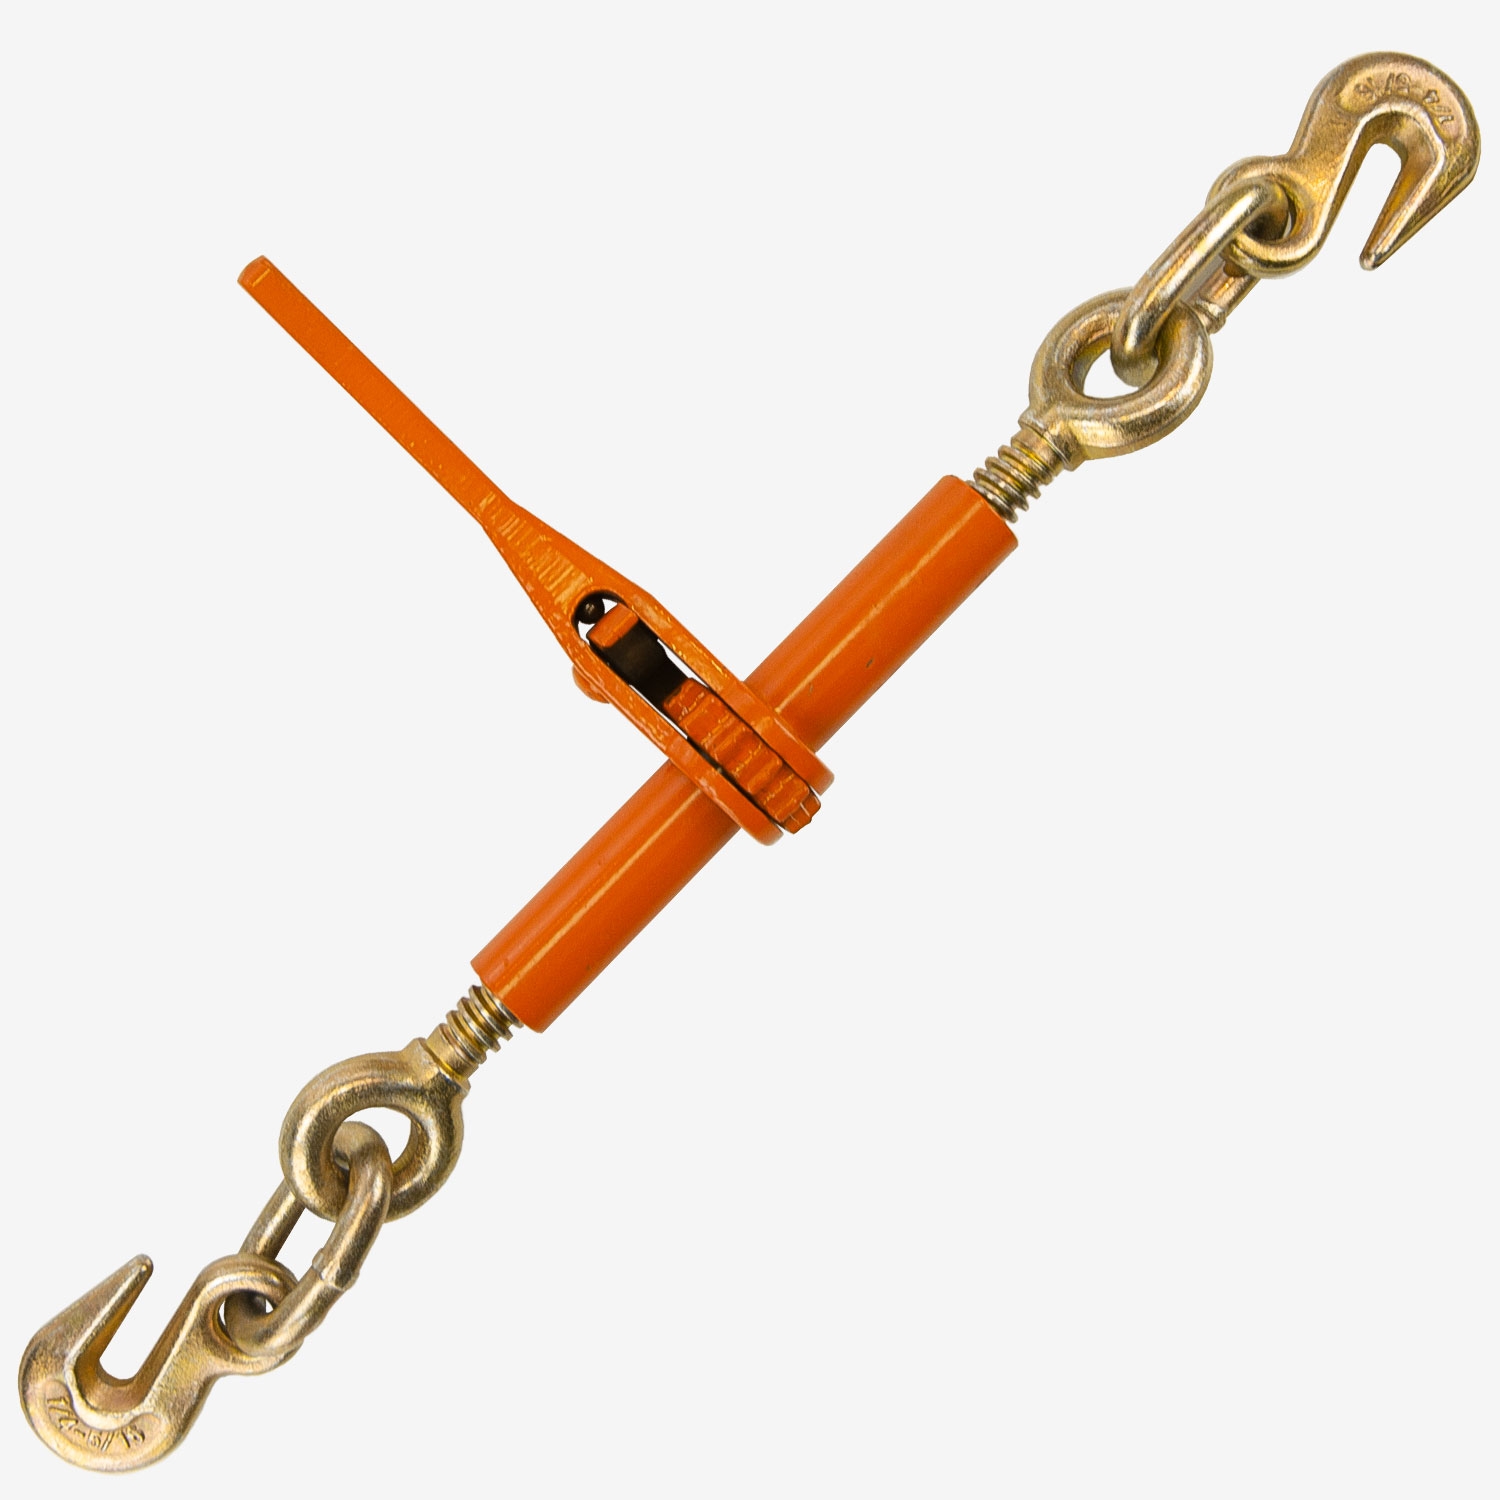 Chain Binders for Flatbed Truck Trailer Heavy Duty Specialty Pro Ratchet Load Chain Binder w/ Grab Hook & Slip Hook 12,000 Lbs Load Limit 1/2 Grab Hook on One Side & 1/2 Slip Hook on Other